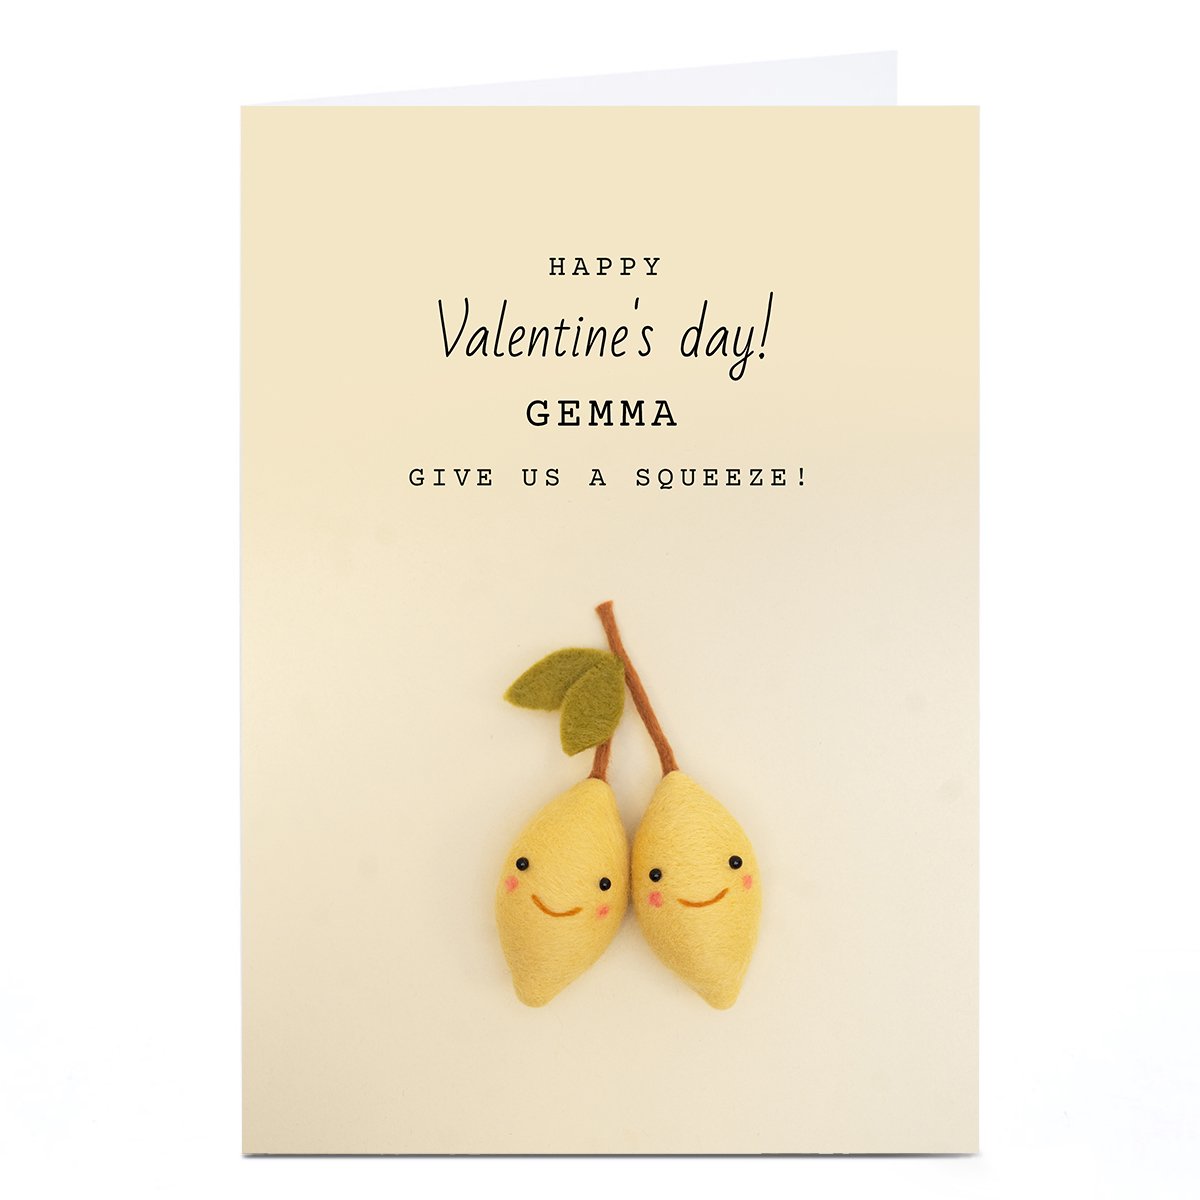 Personalised Lemon & Sugar Valentine's Day Card - Give Us A Squeeze